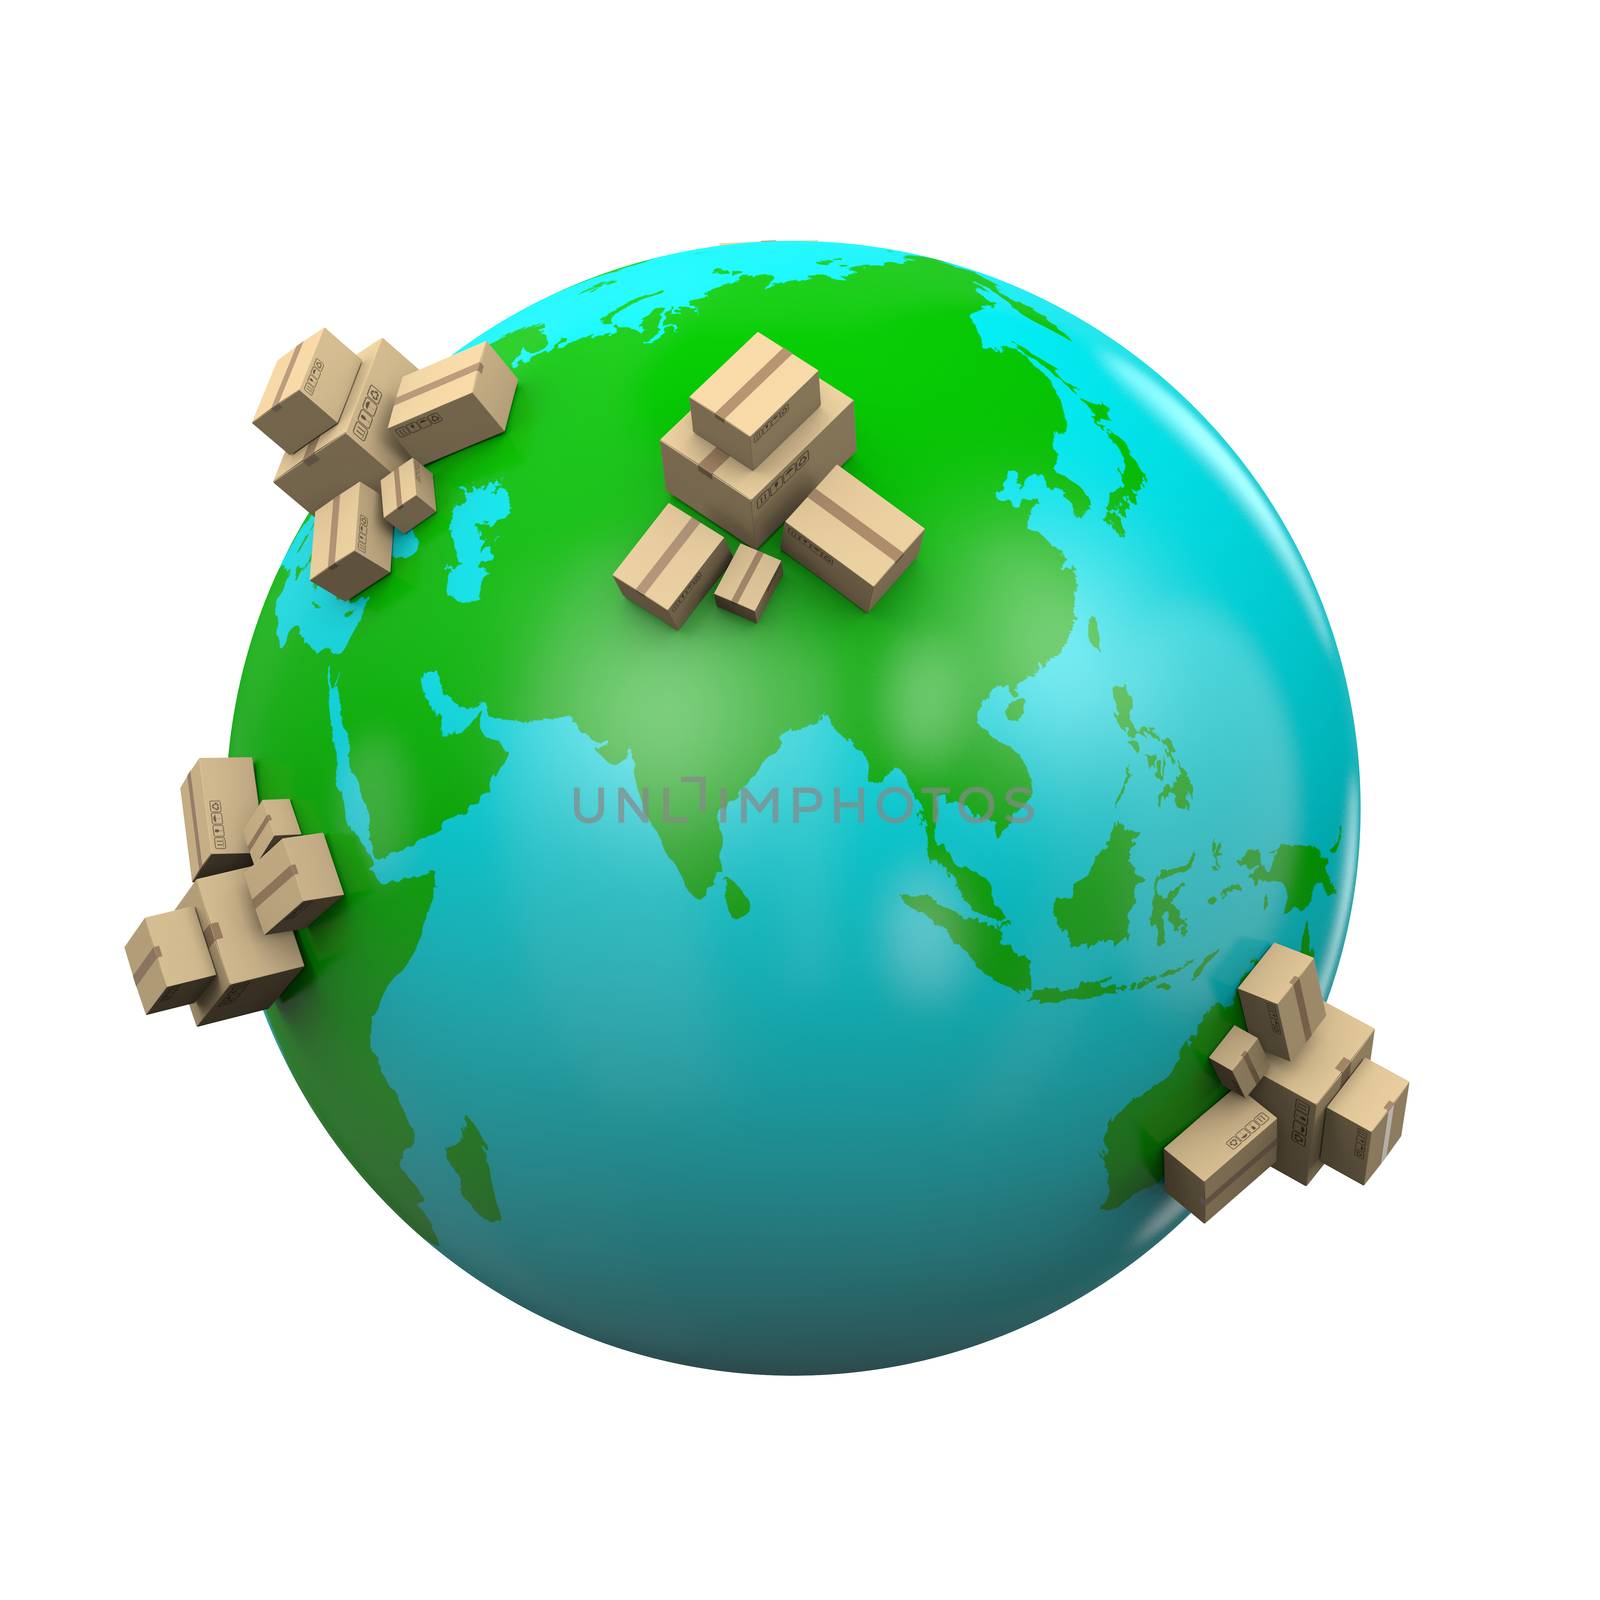 Heaps of Cardboard Boxes on the Earth 3D Illustration, Worldwide Shipping Concept